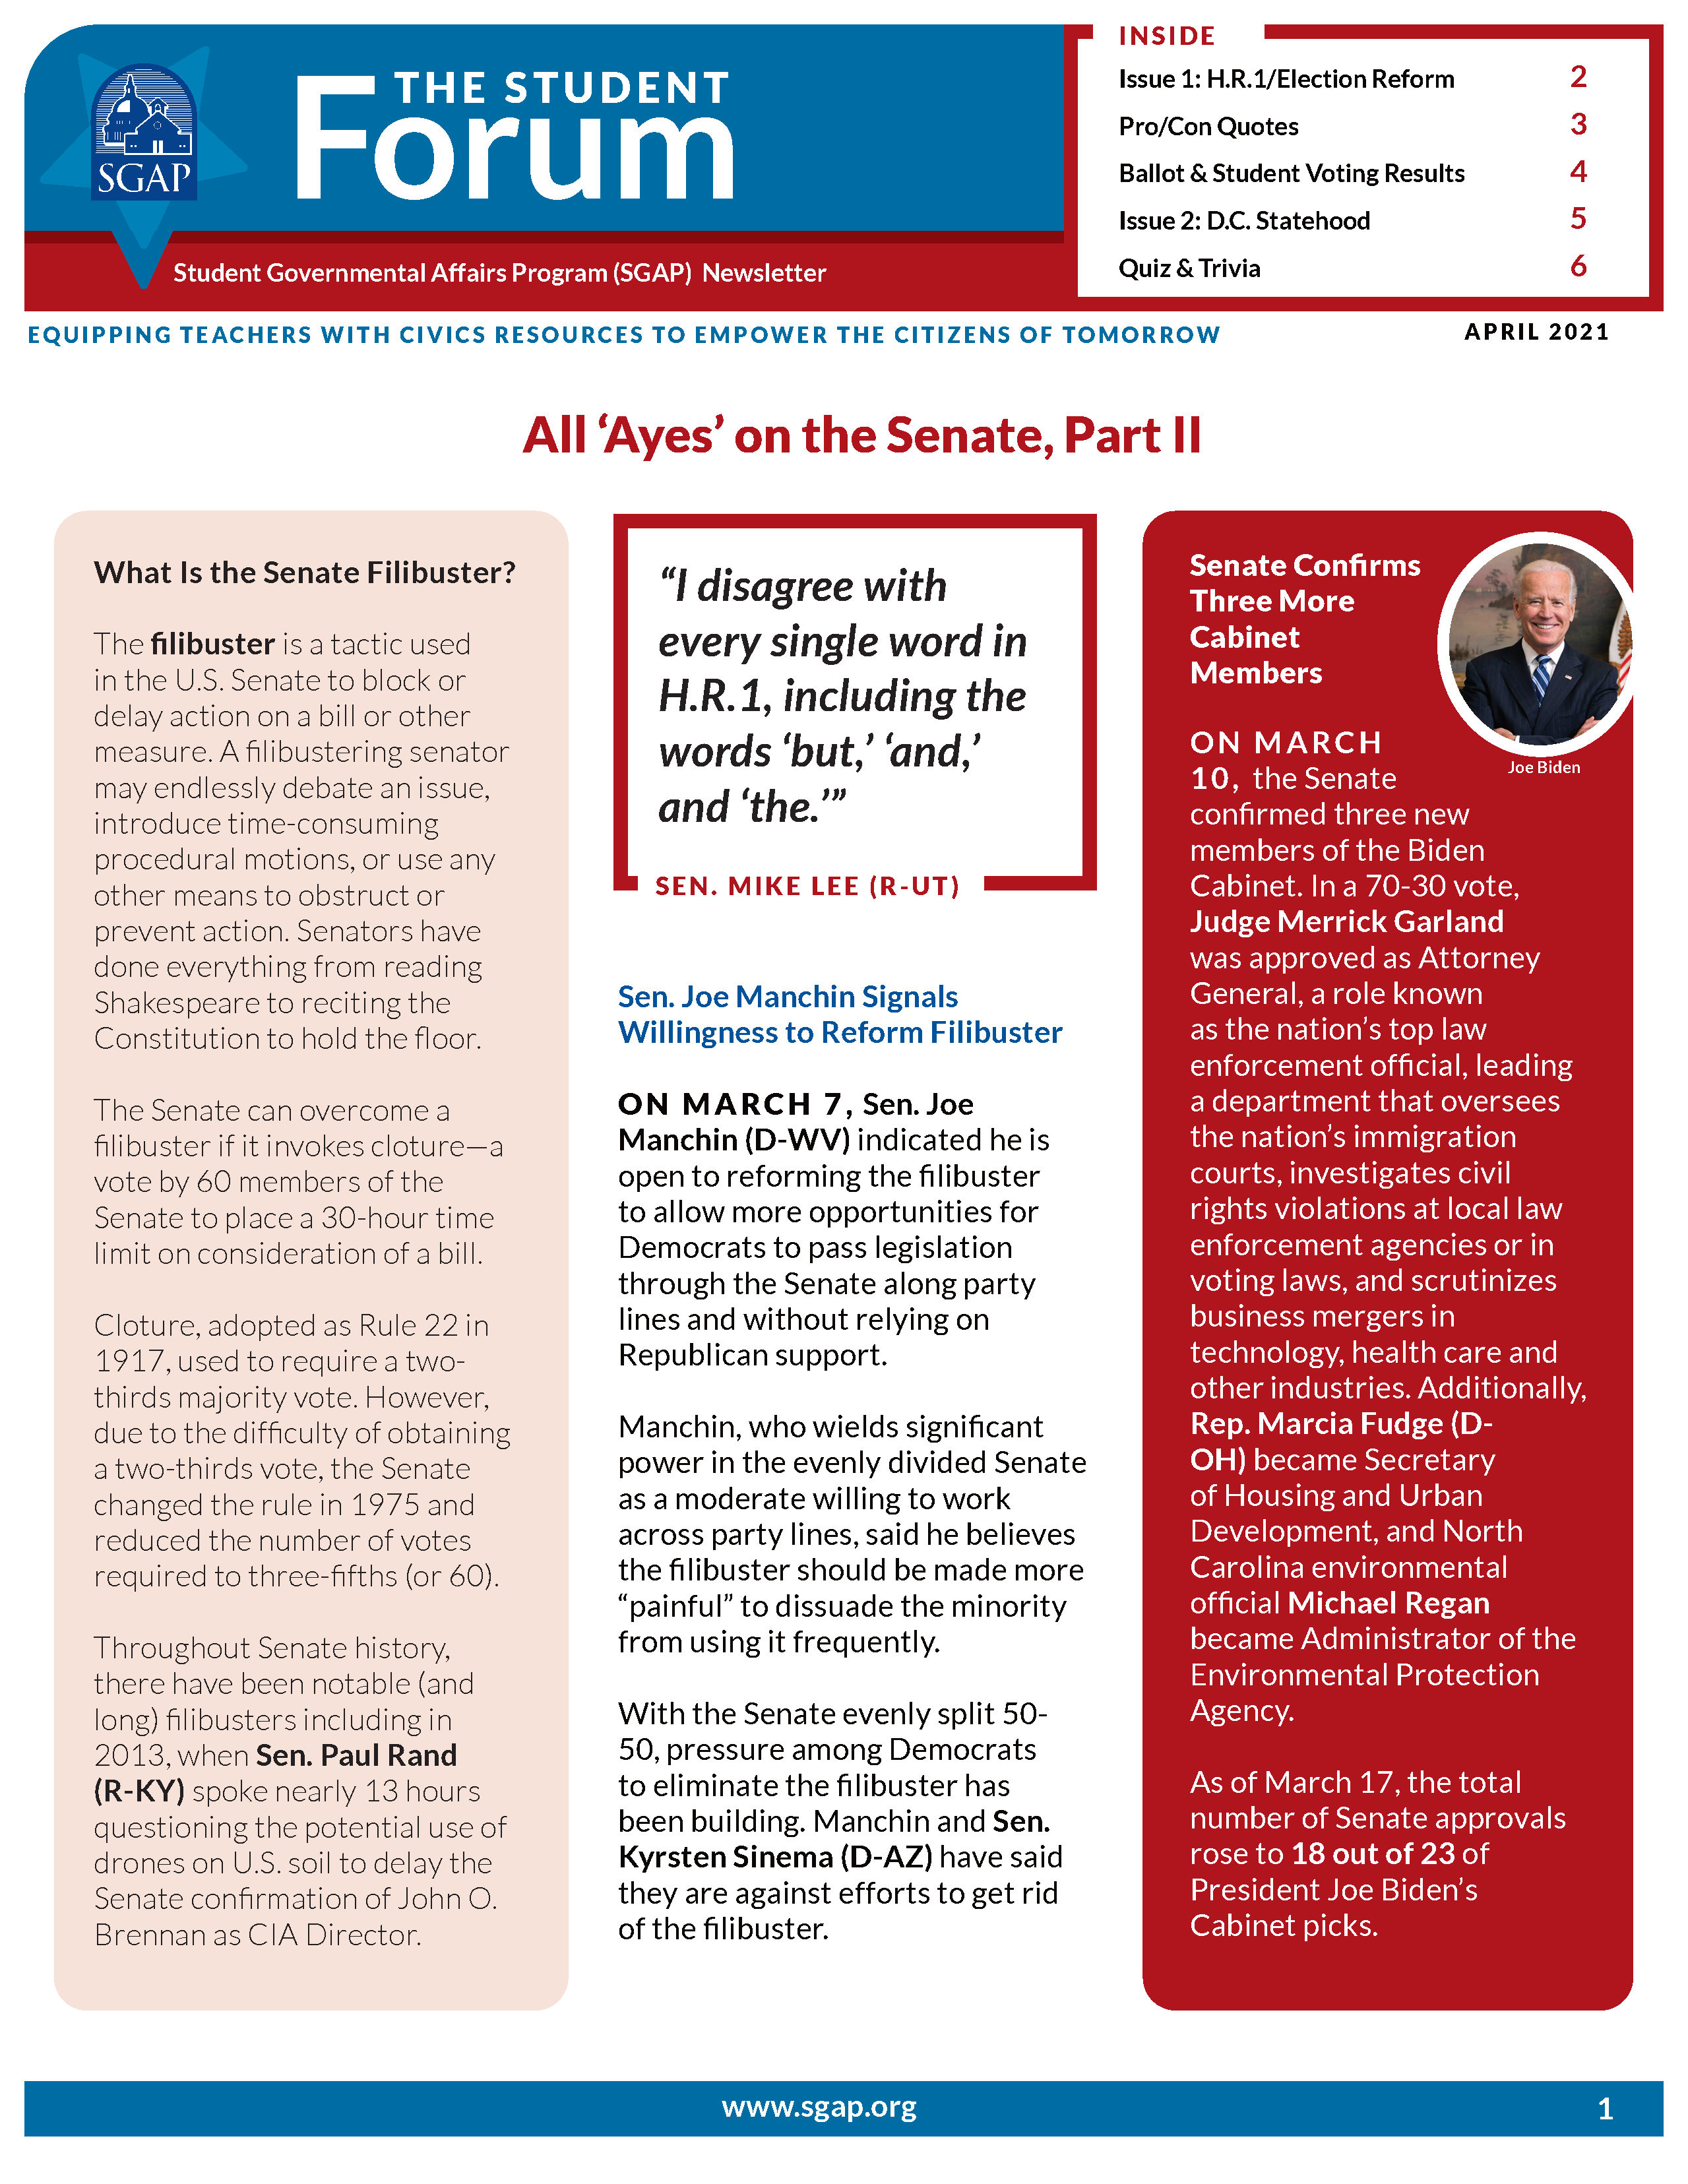 Student Forum Newsletter for April 2021 (H.R.1 and DC Statehood)